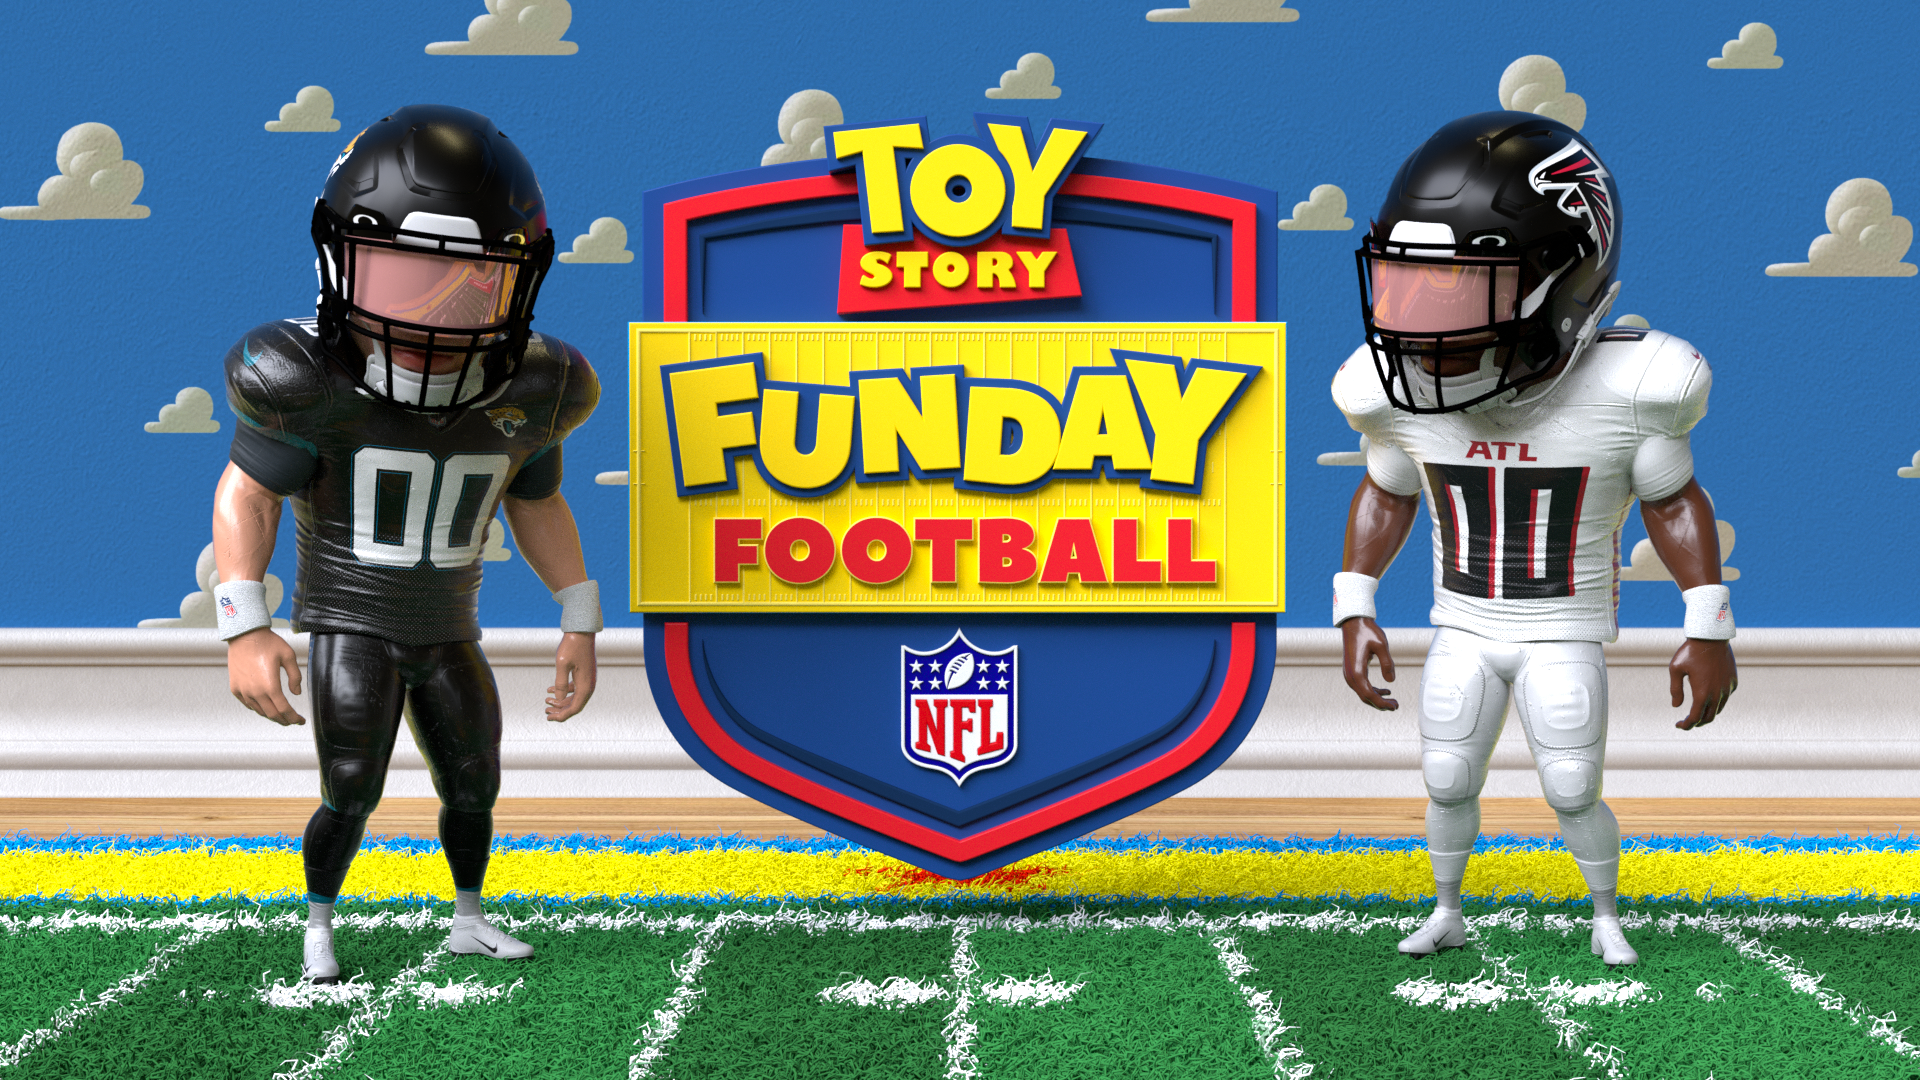 Toy Story' live football broadcast brings animated version to viewers